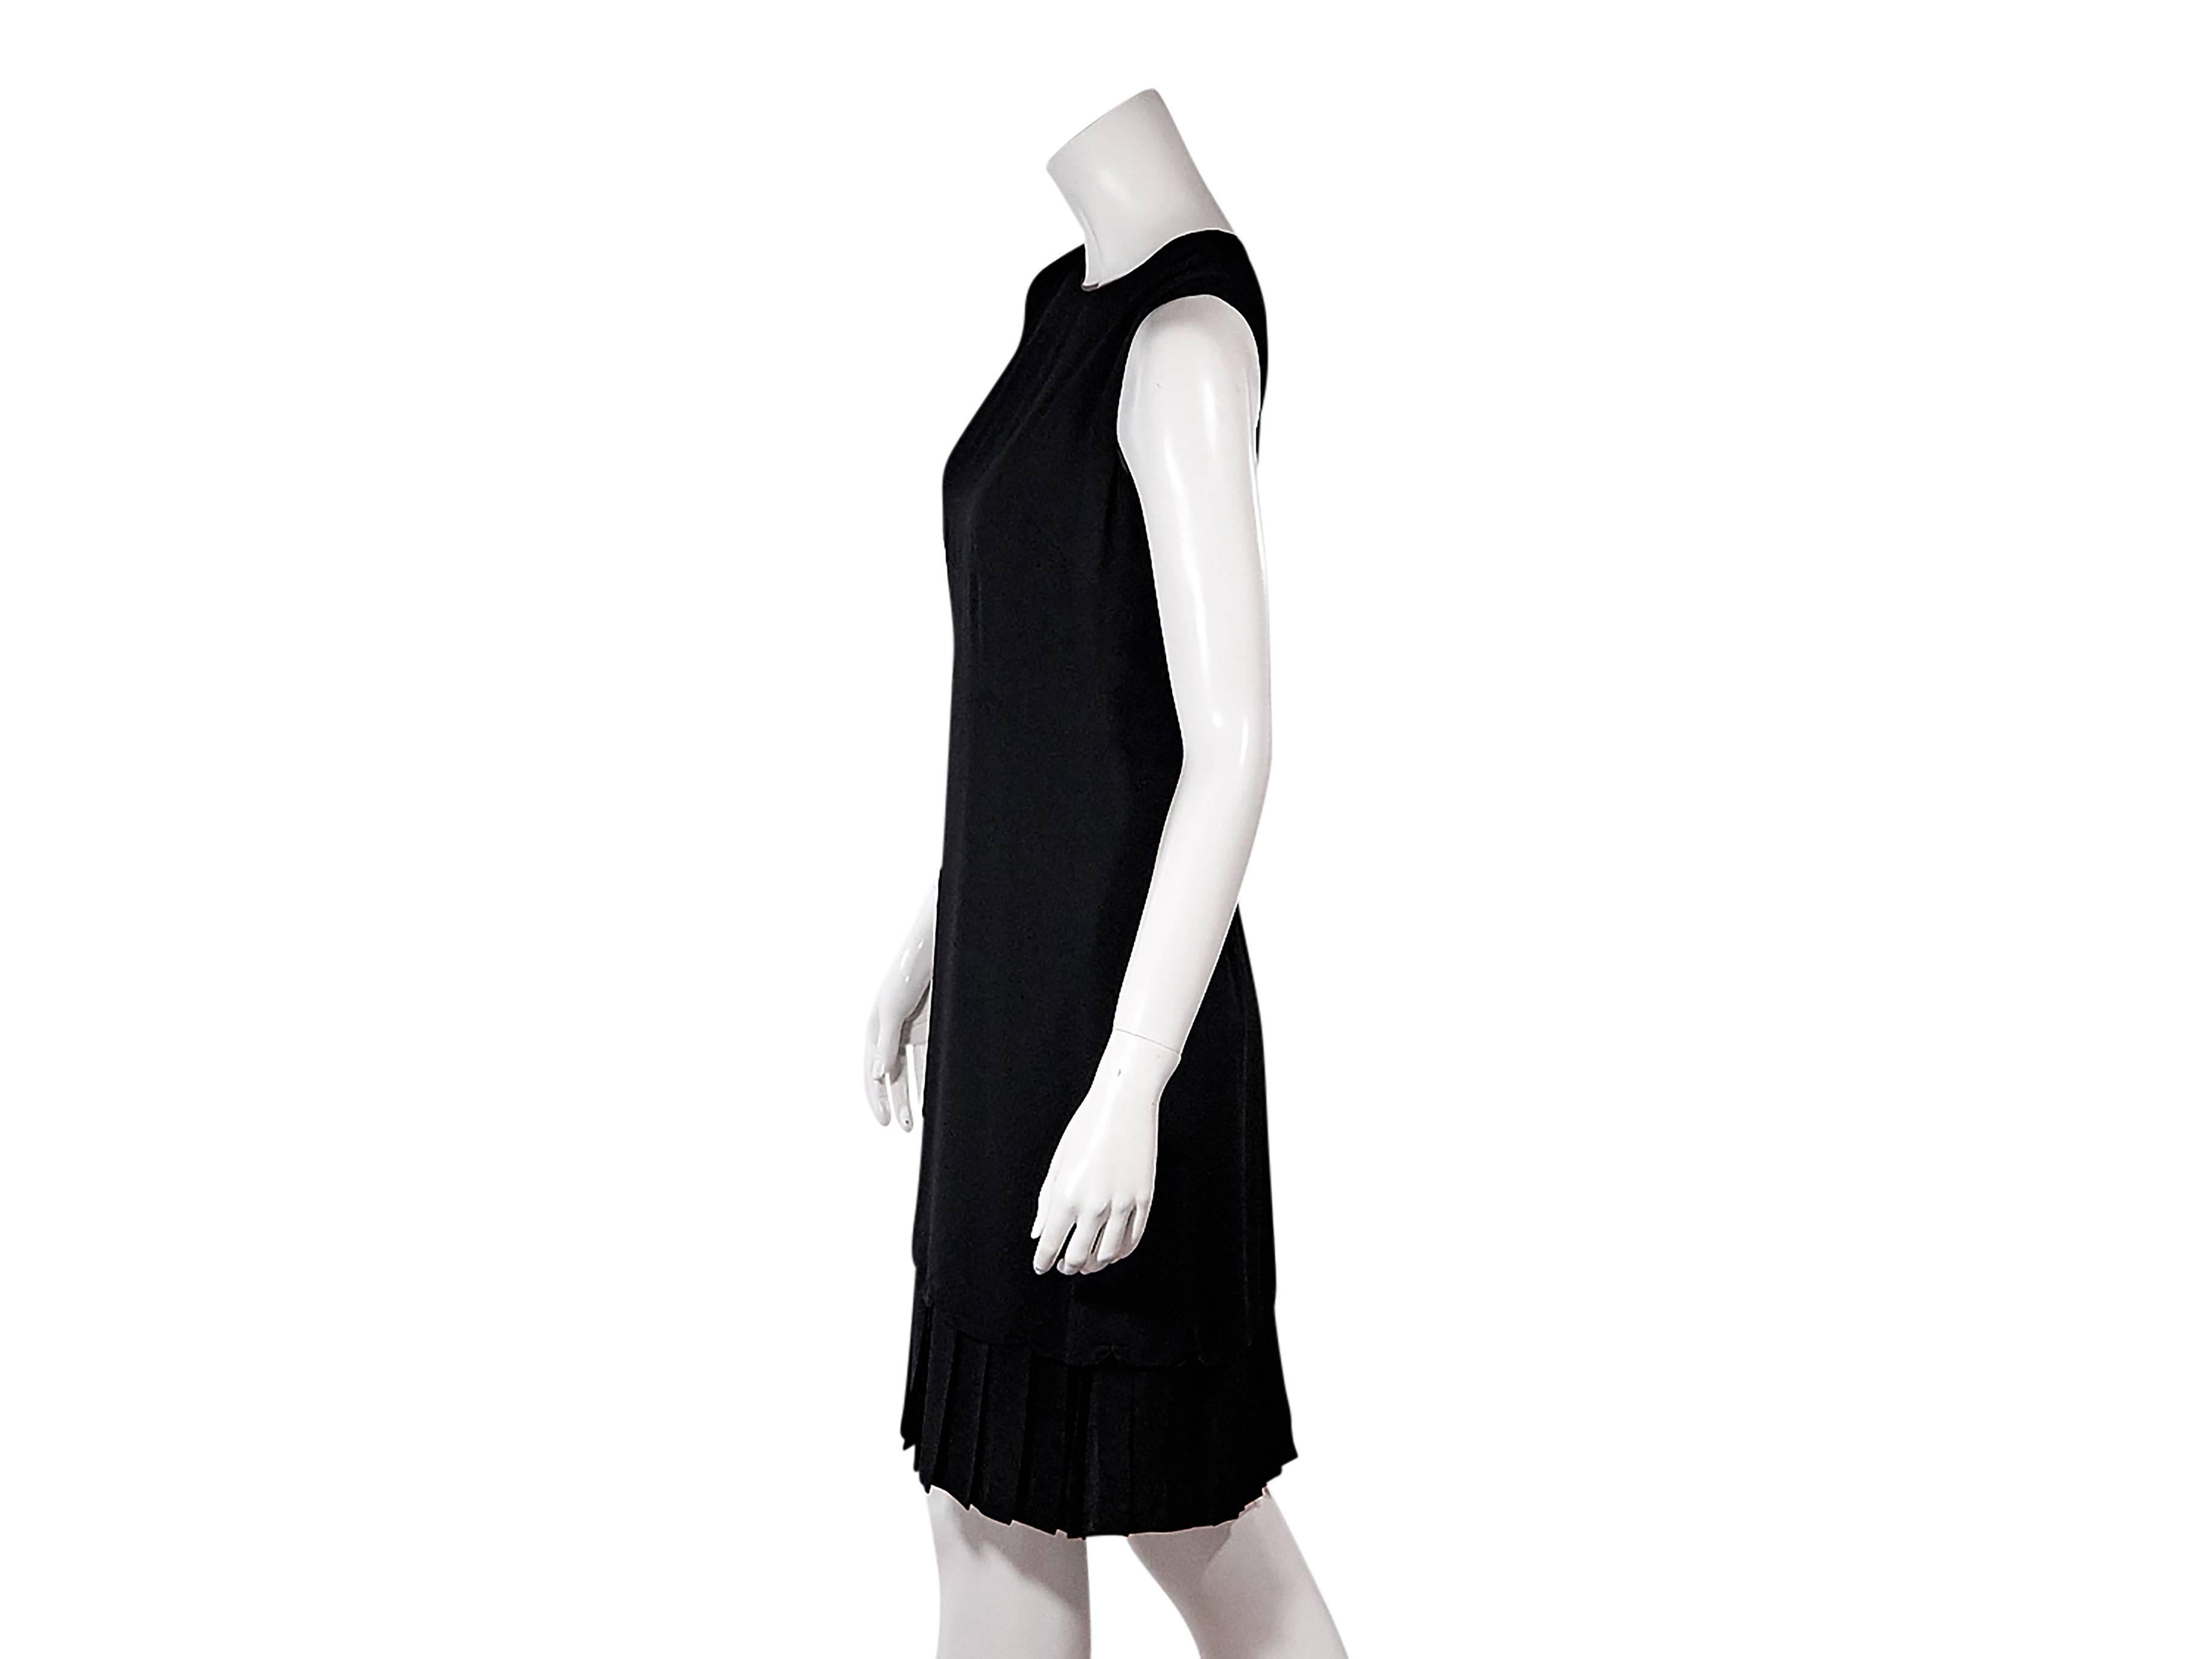 Product details:  Black sheath dress by Prada.  Jewelneck.  Sleeveless.  Concealed back zip closure.  Pleated hem. Size 6/8
Condition: Pre-owned. Very good.

Est. Retail $ 1,800.00